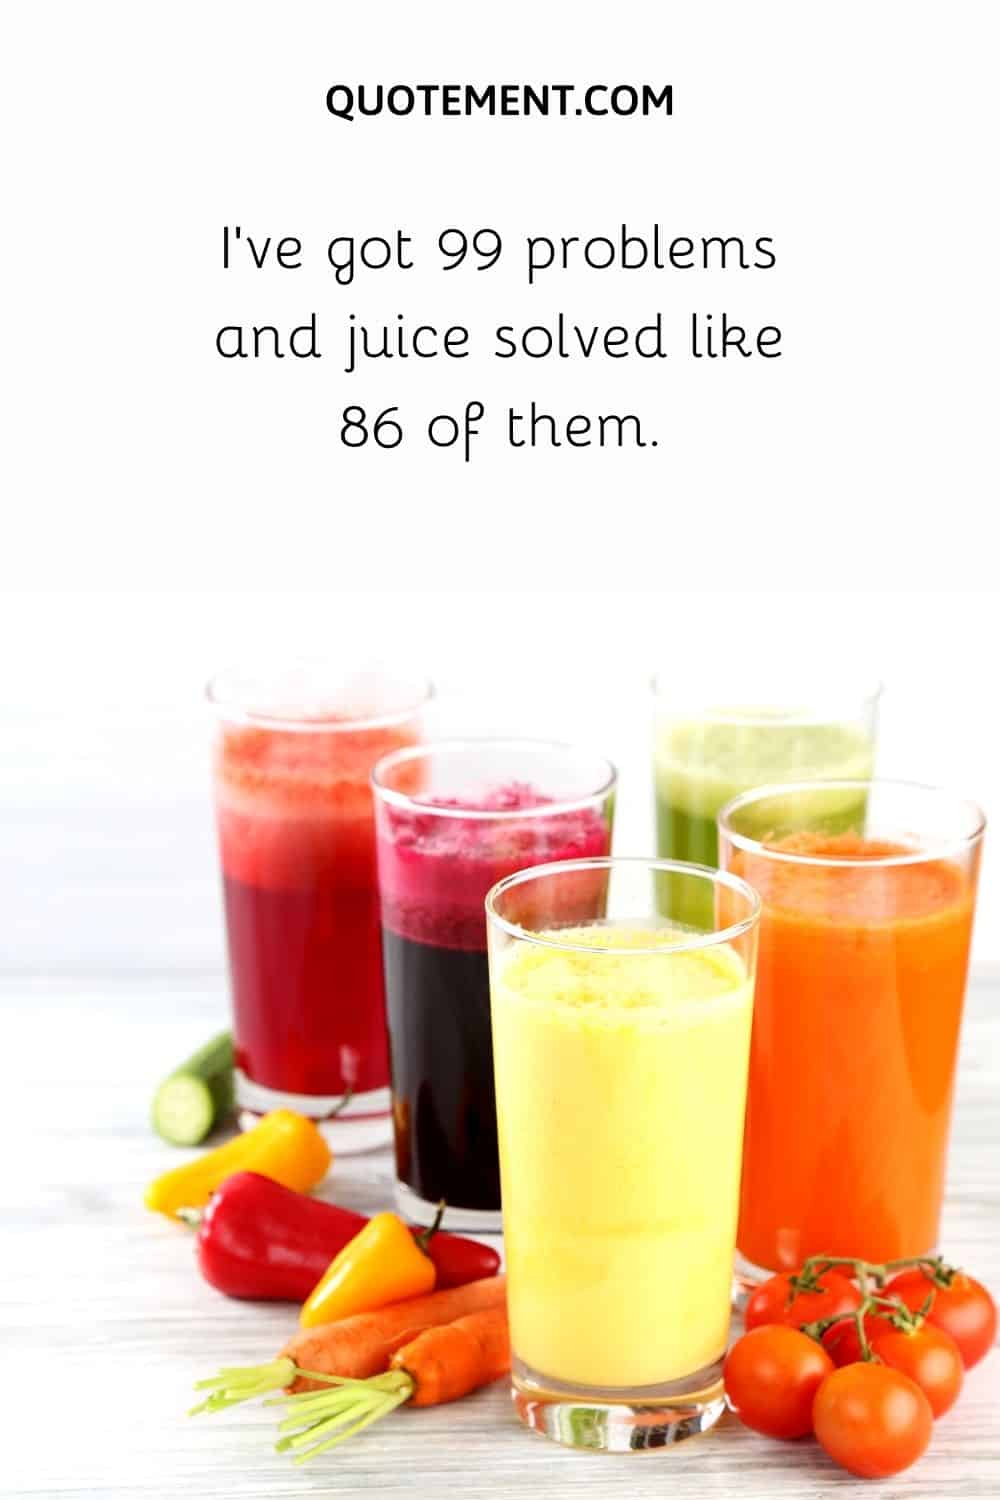 I’ve got 99 problems and juice solved like 86 of them